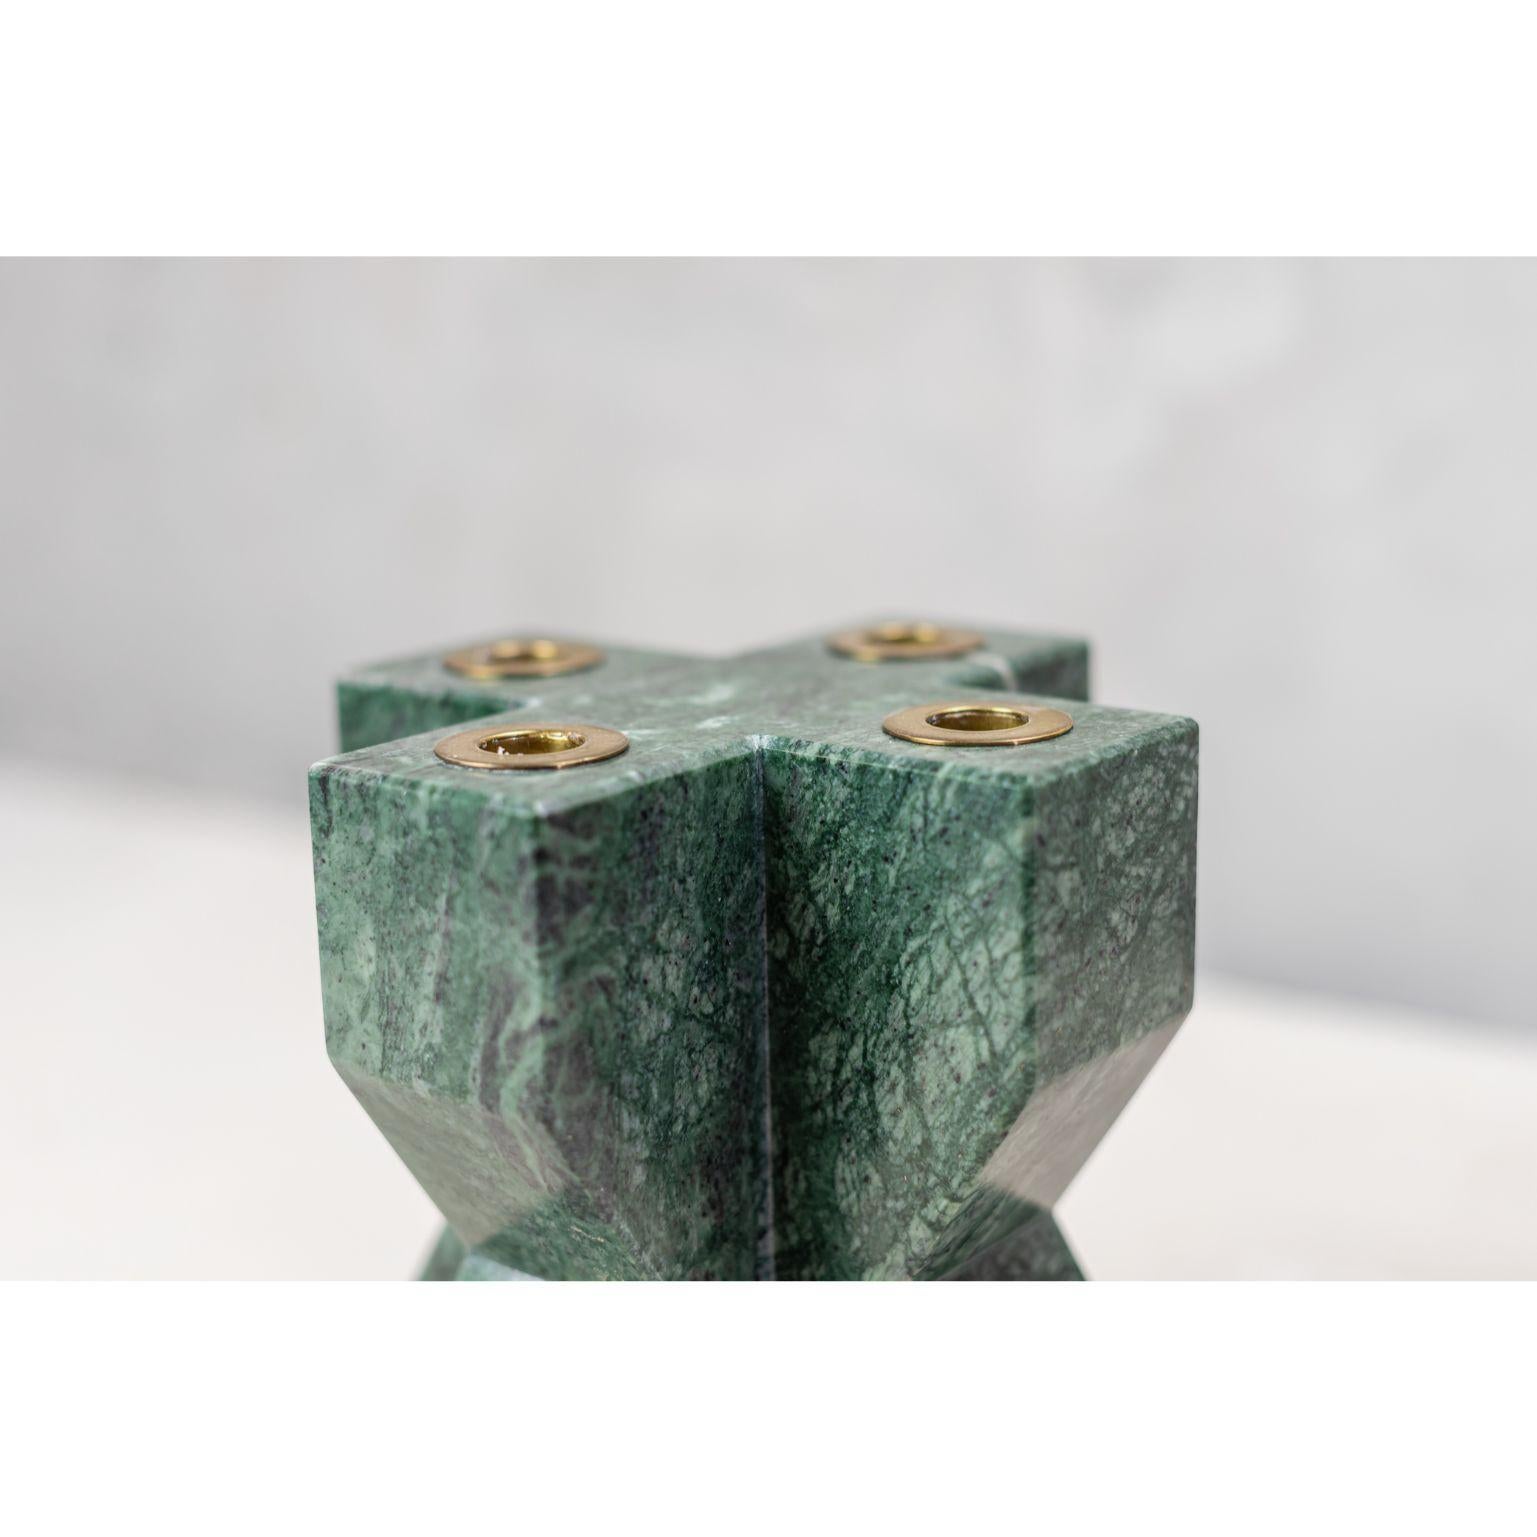 Portuguese Fort Marble Candle Holder by Essenzia